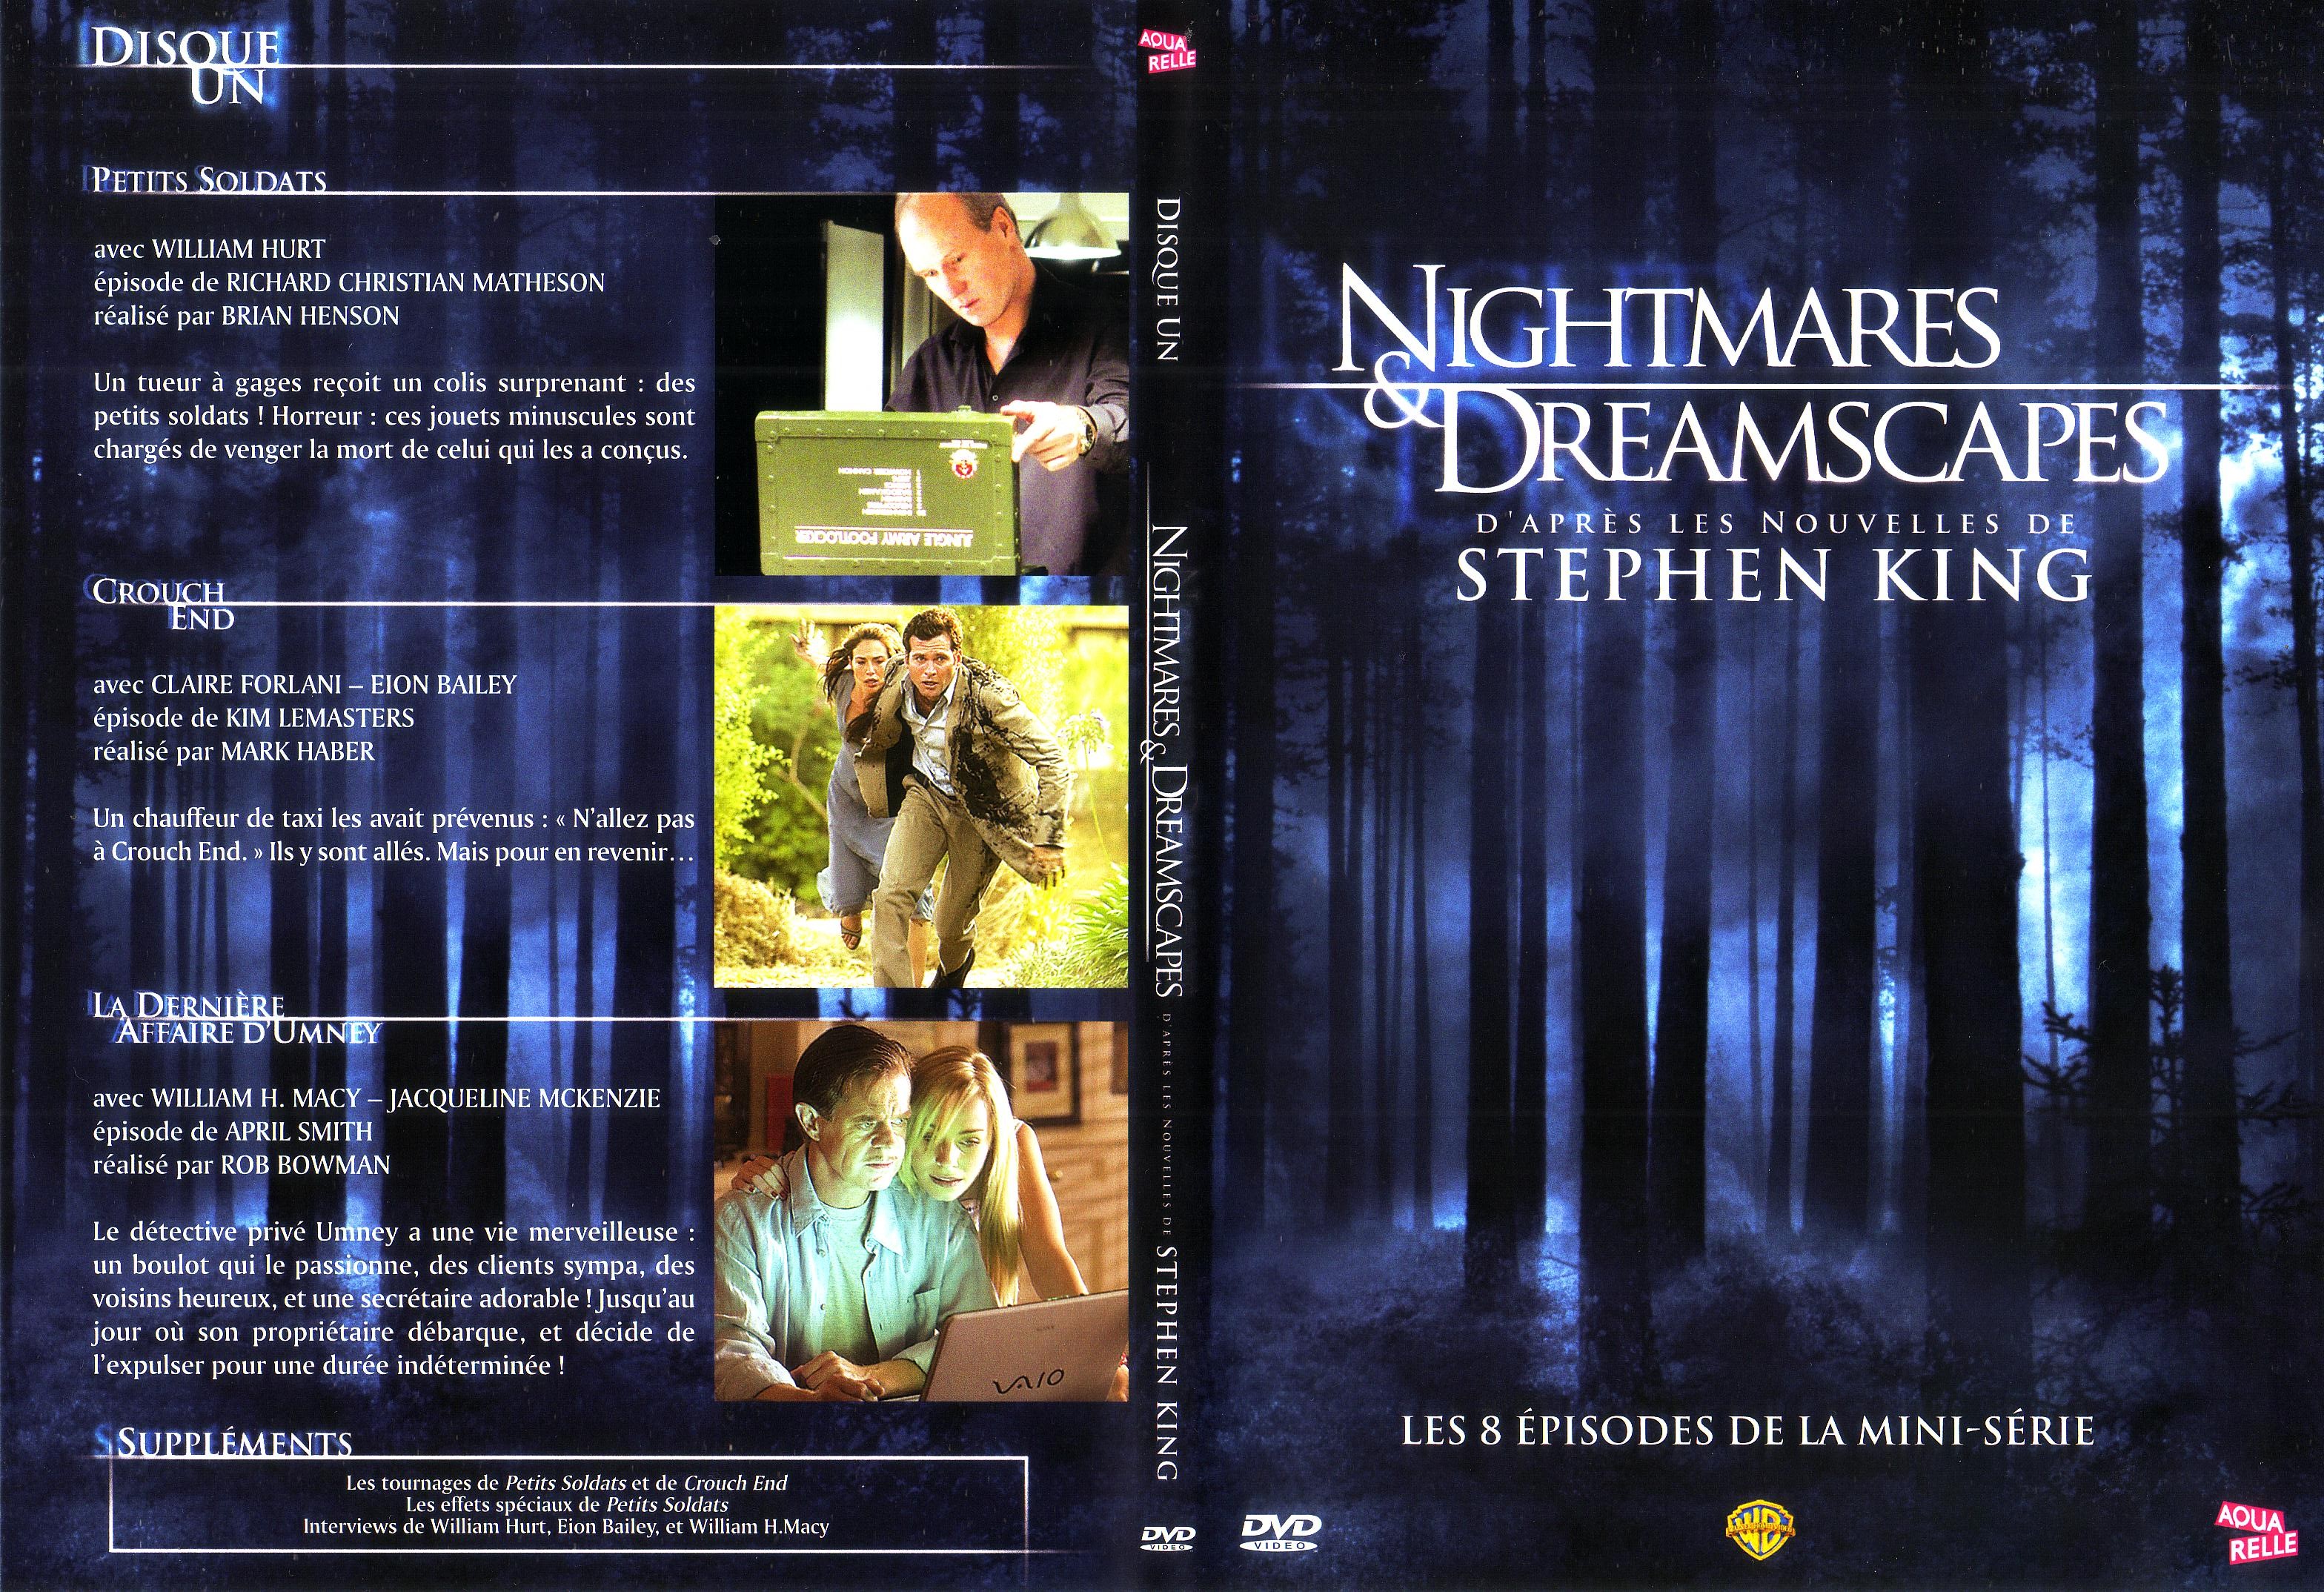 Jaquette DVD NIghtmares & Dreamscapes DVD 1